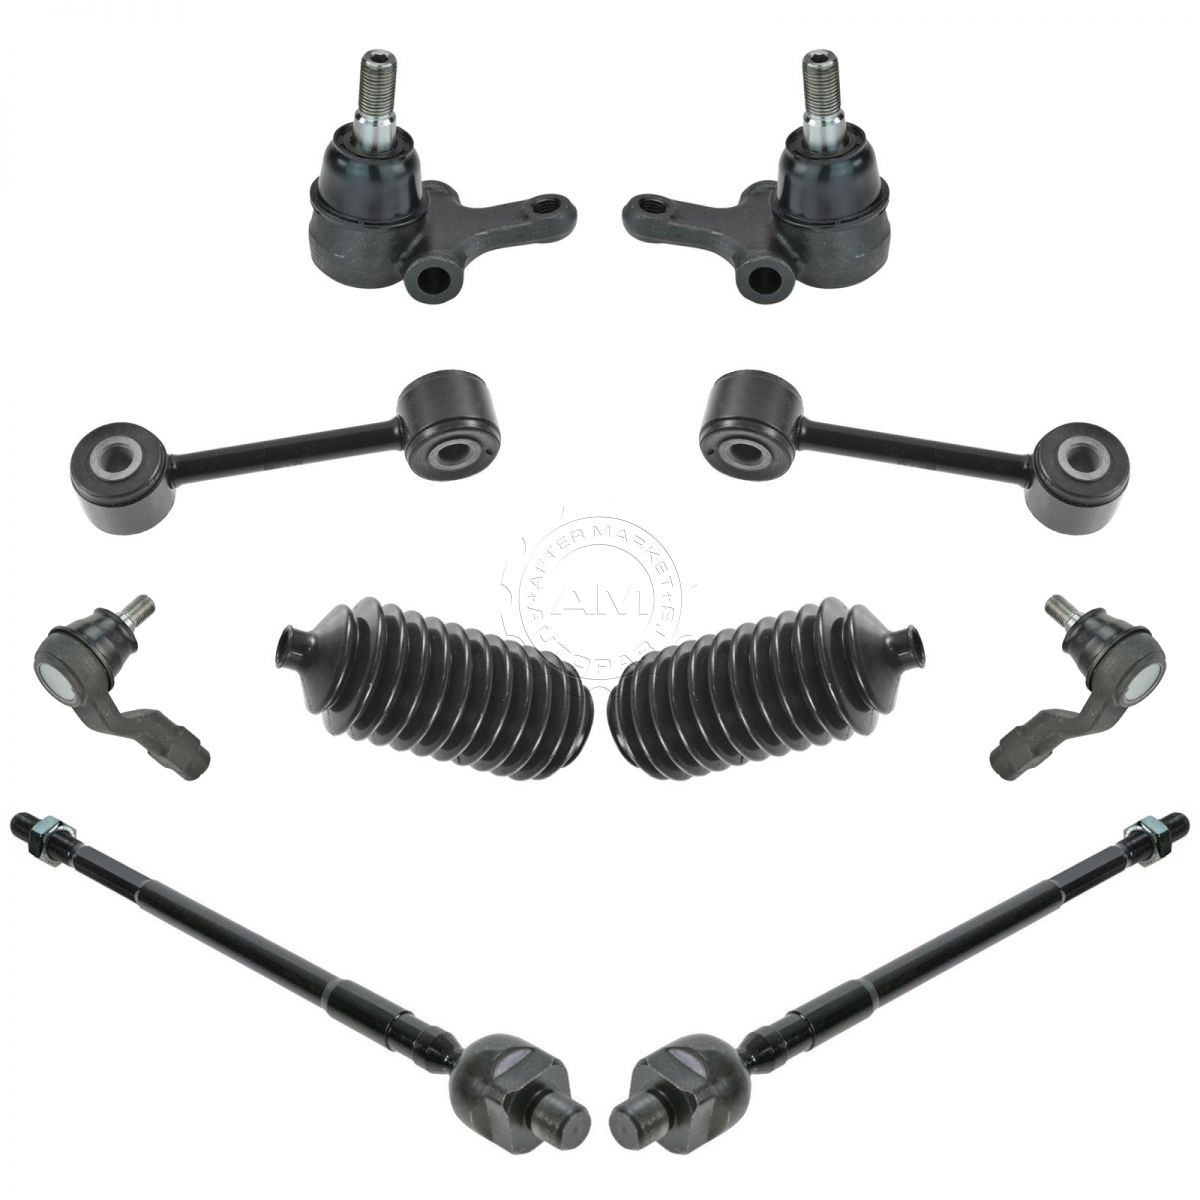 12 Pc Steering /& Suspension Kit Ball Joints Tie Rods Sway Bar for Chrysler Dodge